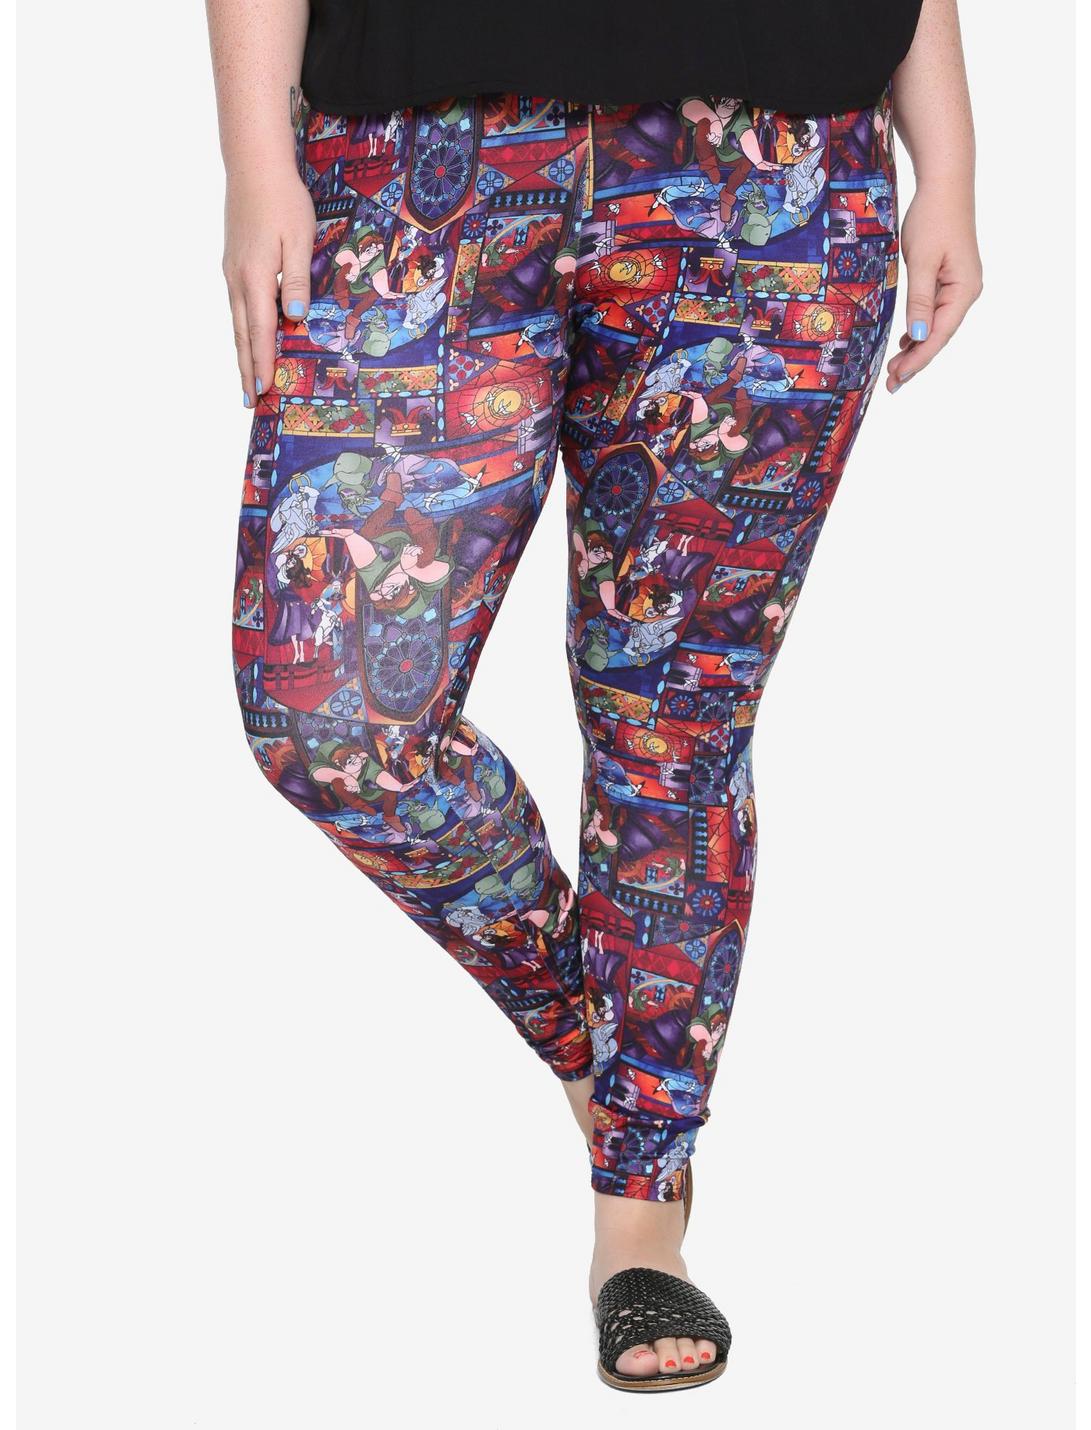 Disney The Hunchback Of Notre Dame Stained Glass Leggings Plus Size, MULTICOLOR, hi-res